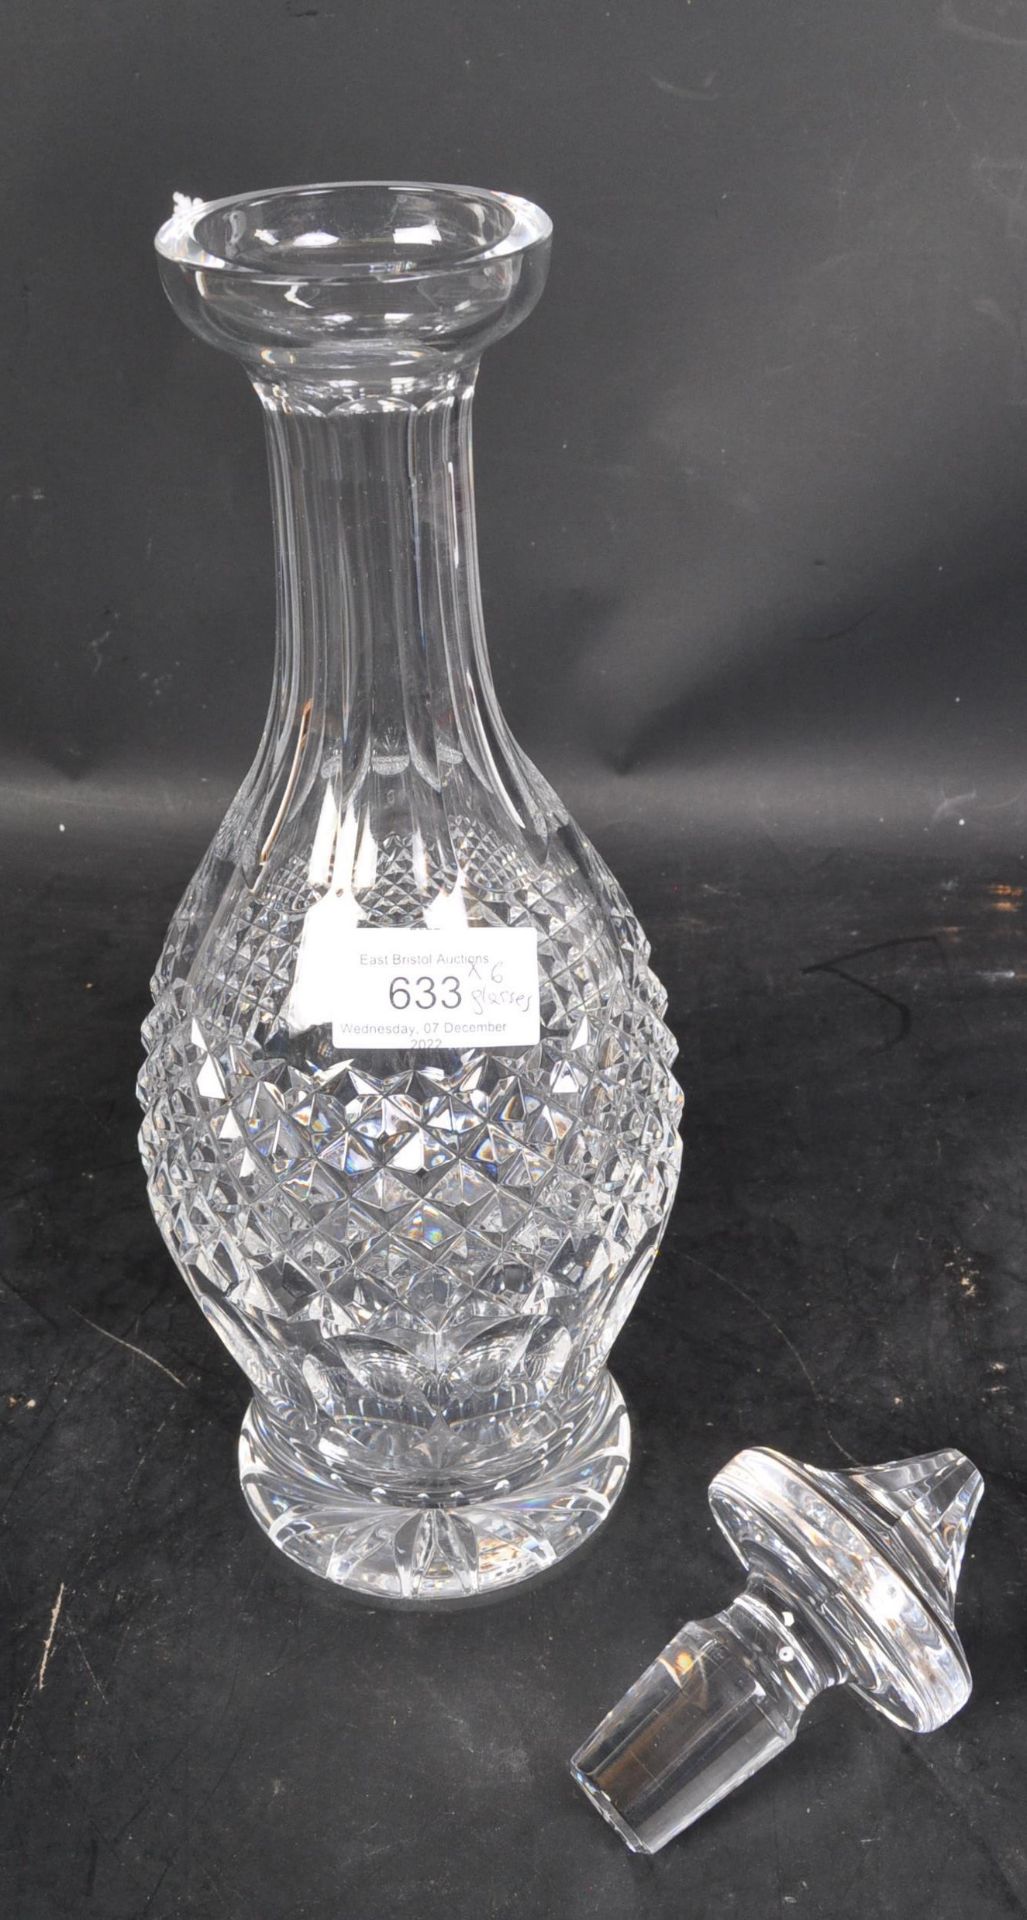 SIX VINTAGE WATERFORD CRYSTAL SHERRY GLASSES & DECANTER - Image 4 of 5